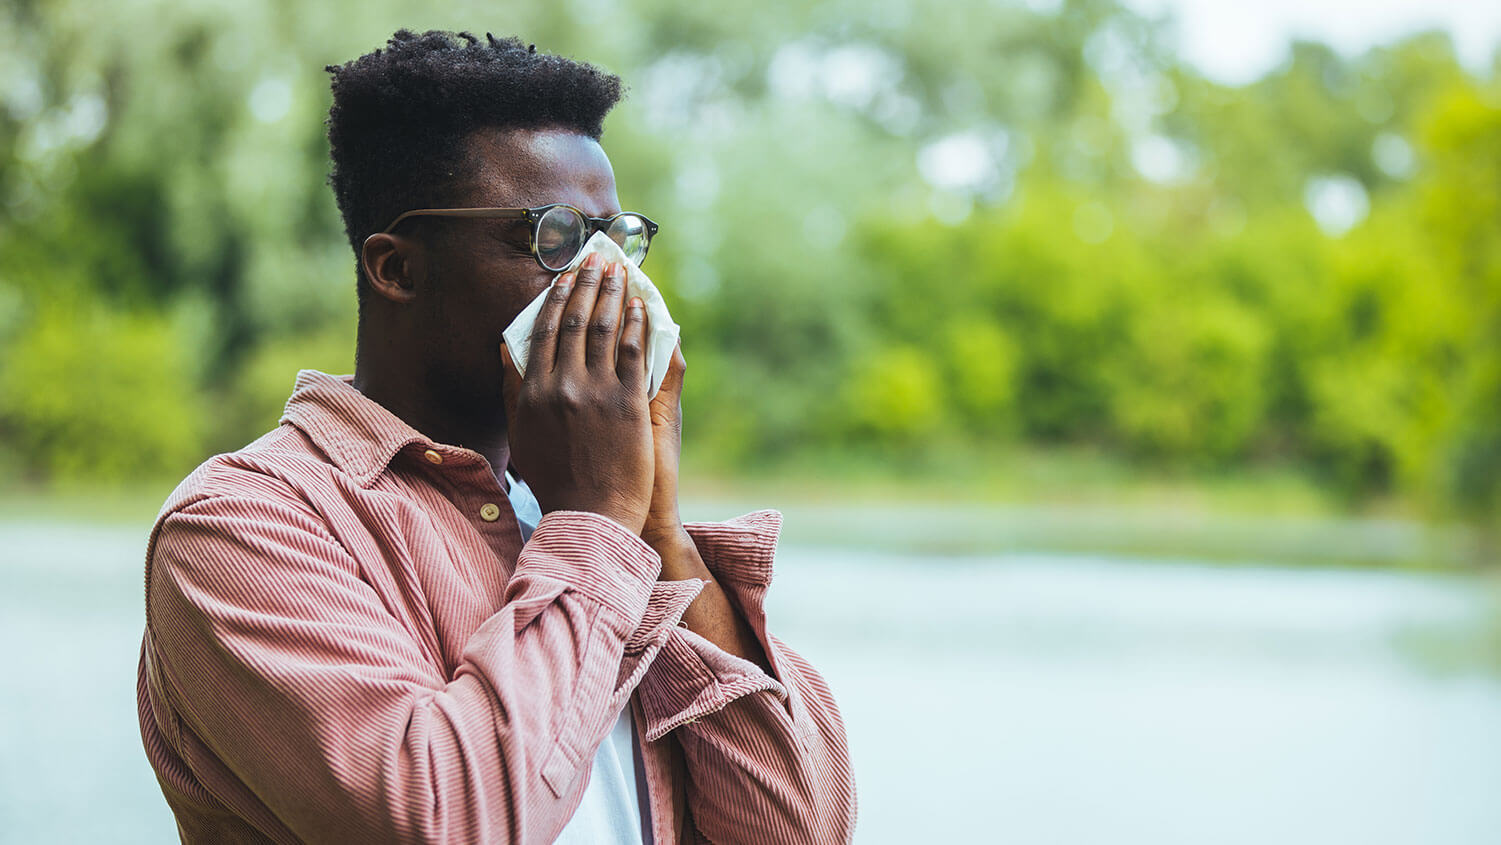 A man sneezing into a tissue.